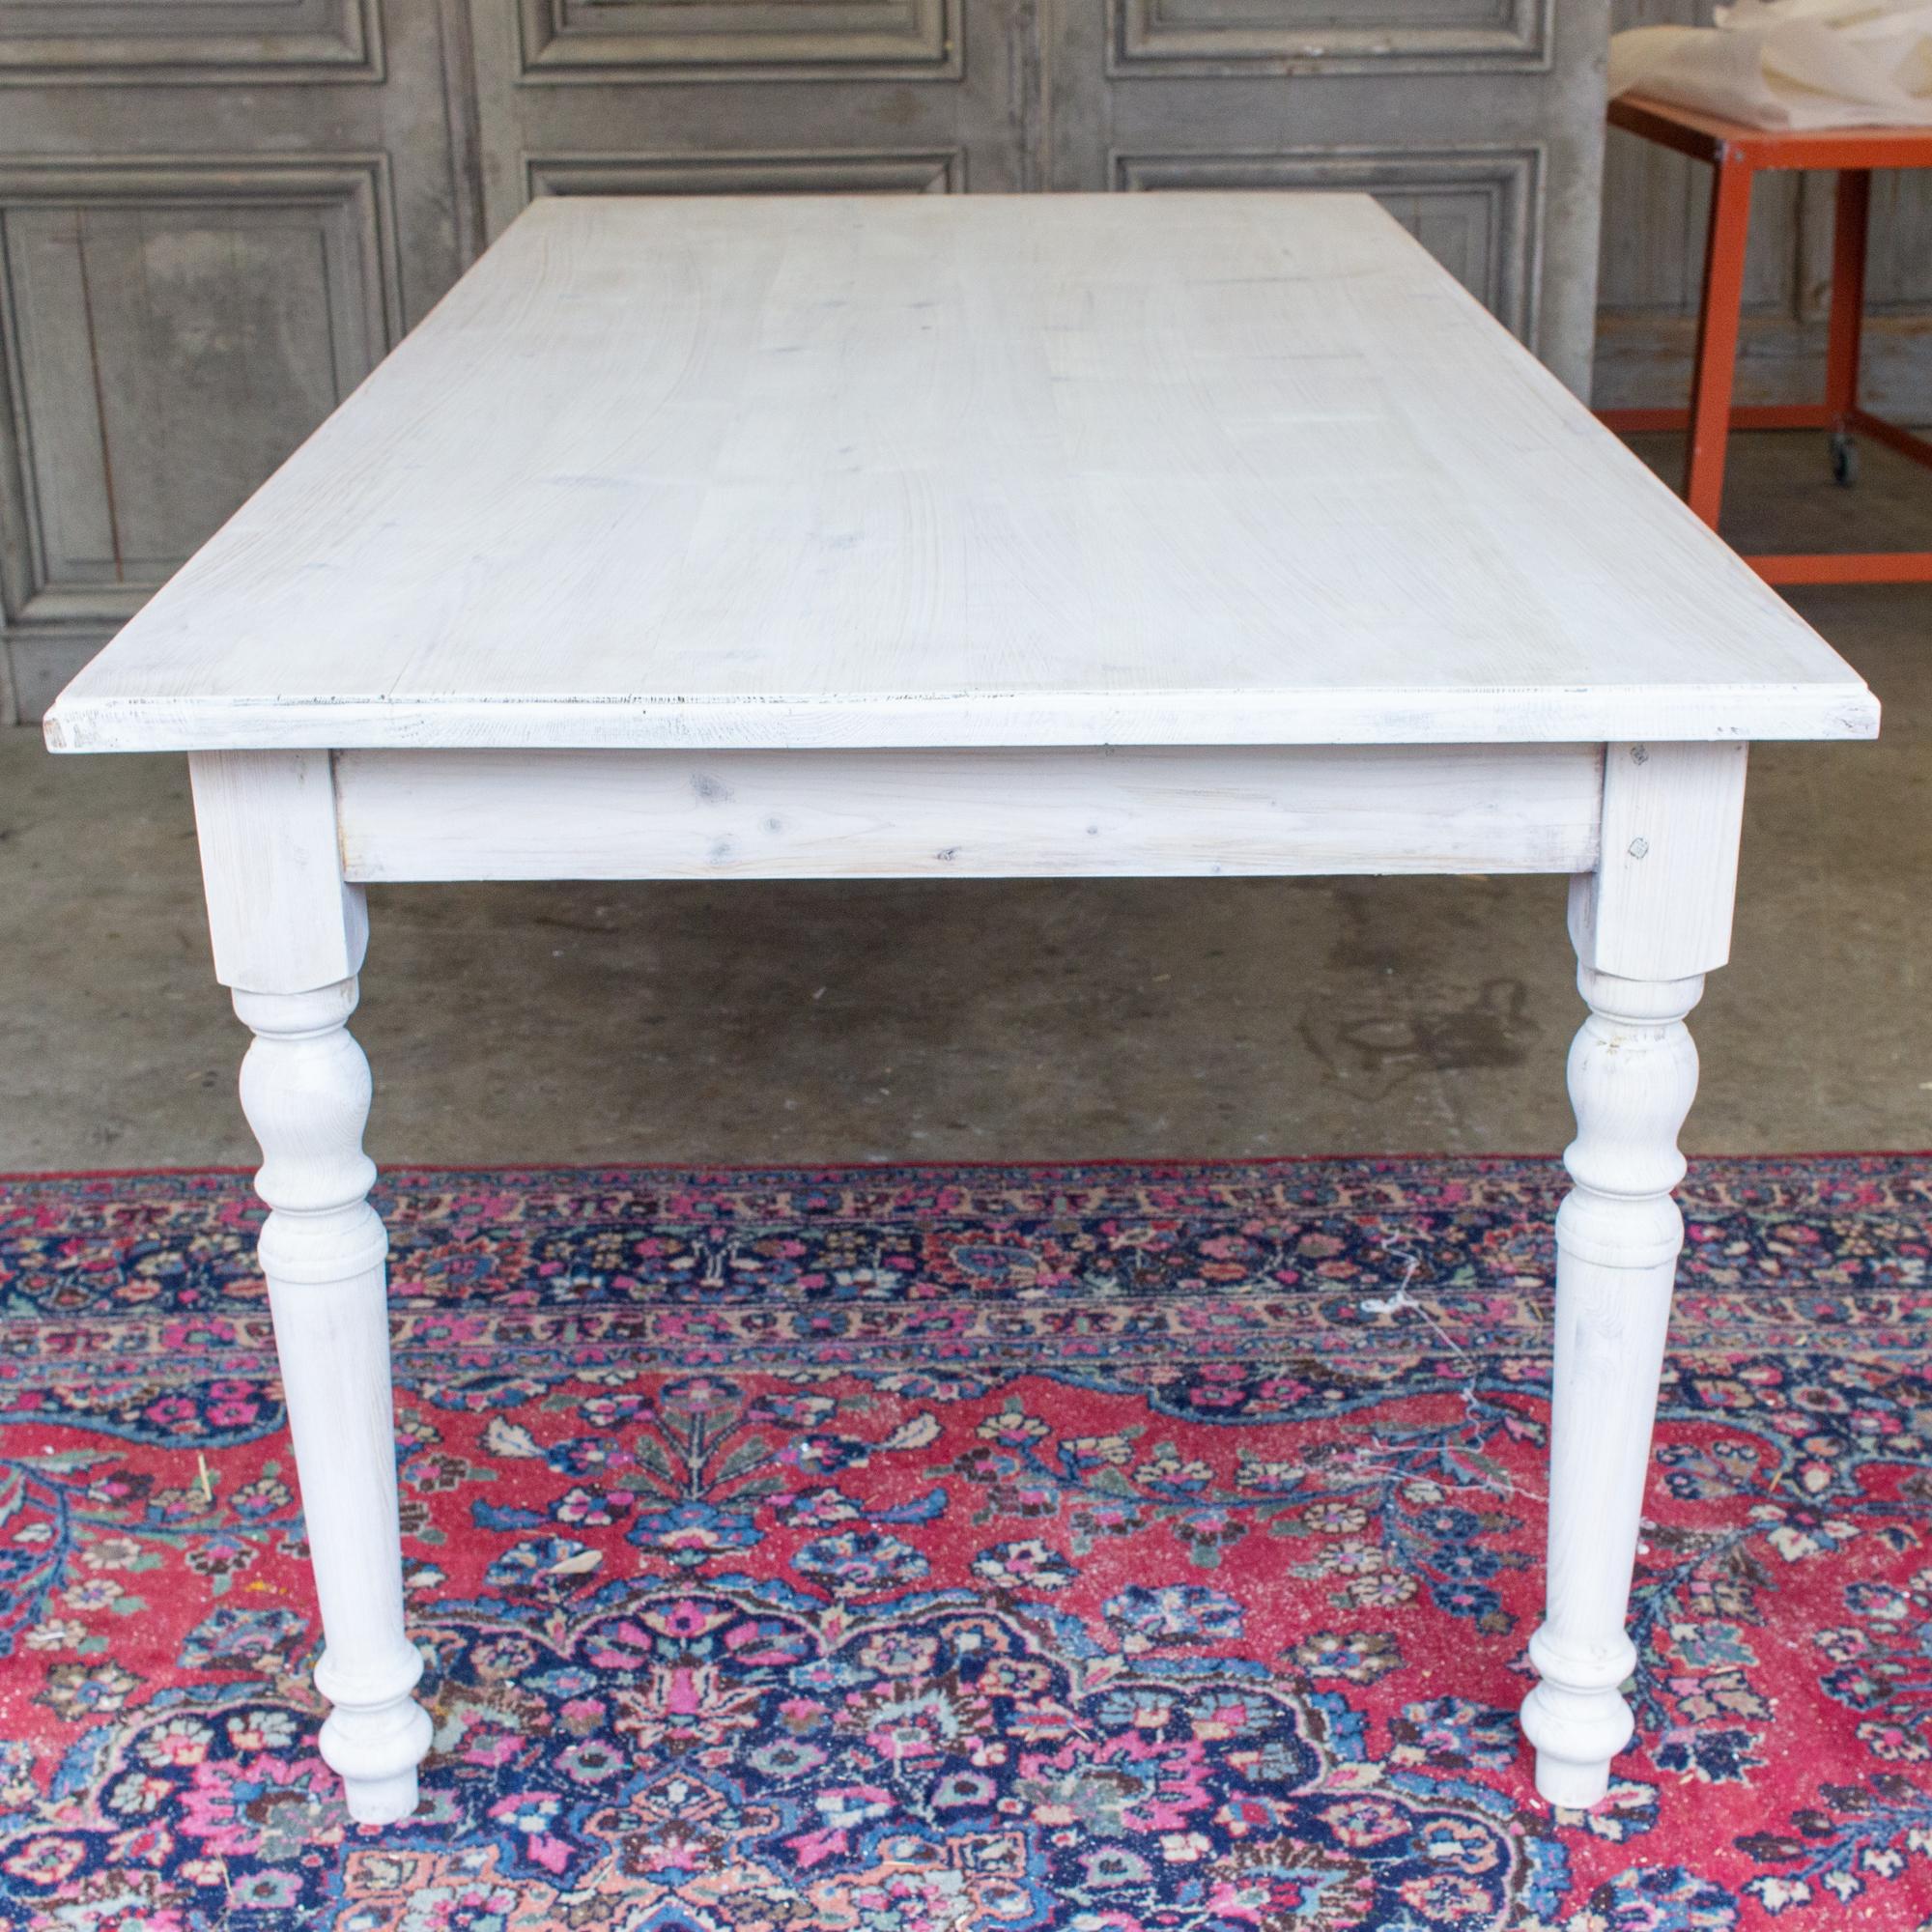 Early 20th Century Large Pine Farm Table and Worktable with Drawer in Whitewash Painted Finish